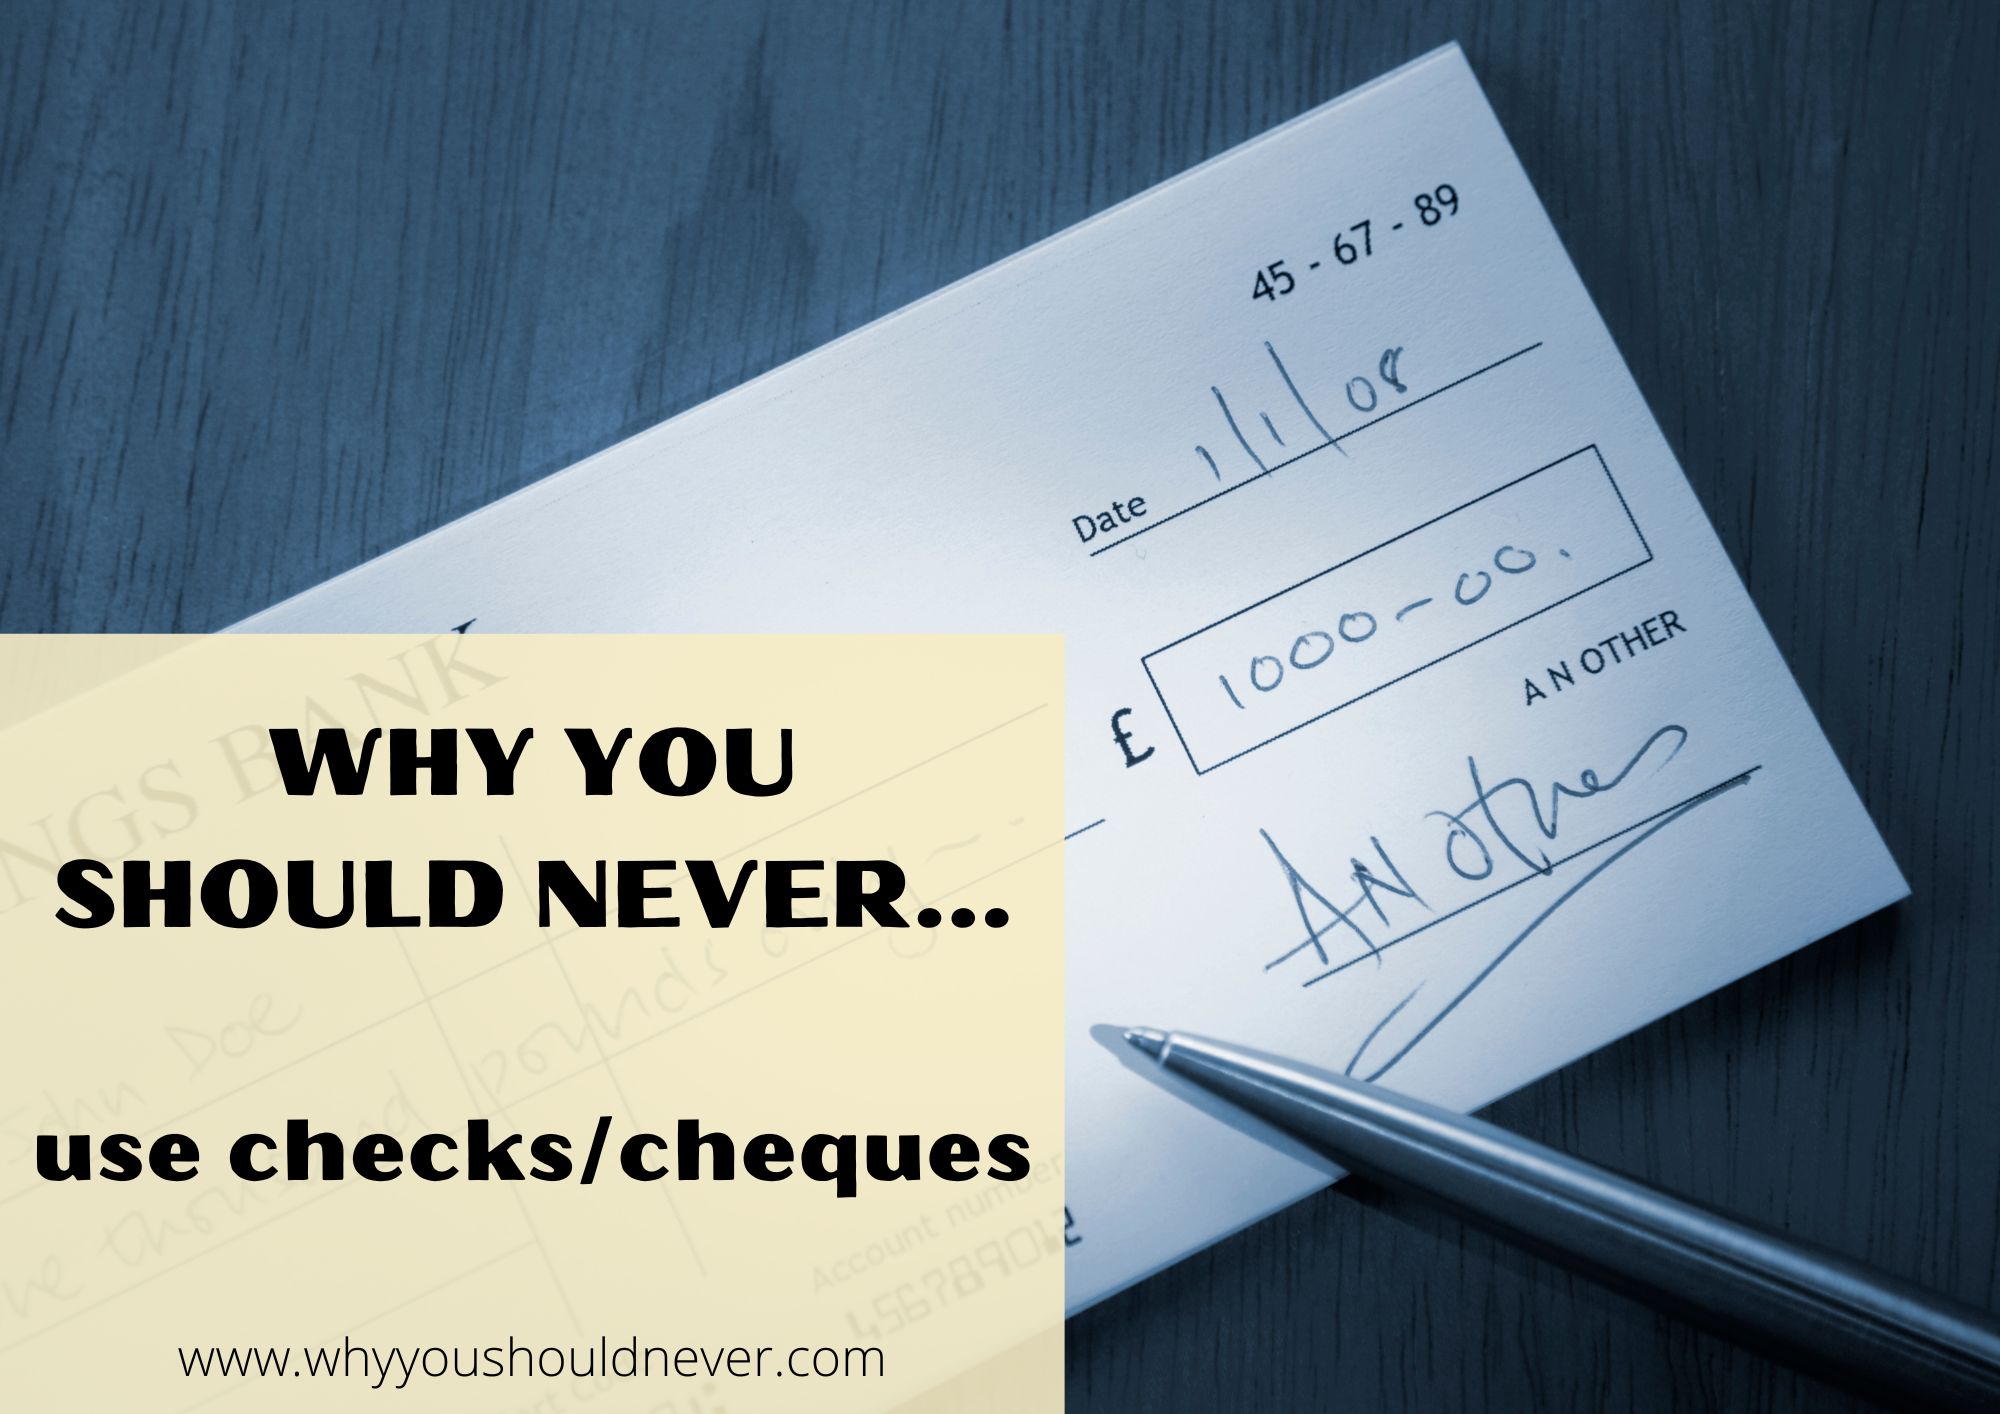 Why You Should Never Use Checks/Cheques